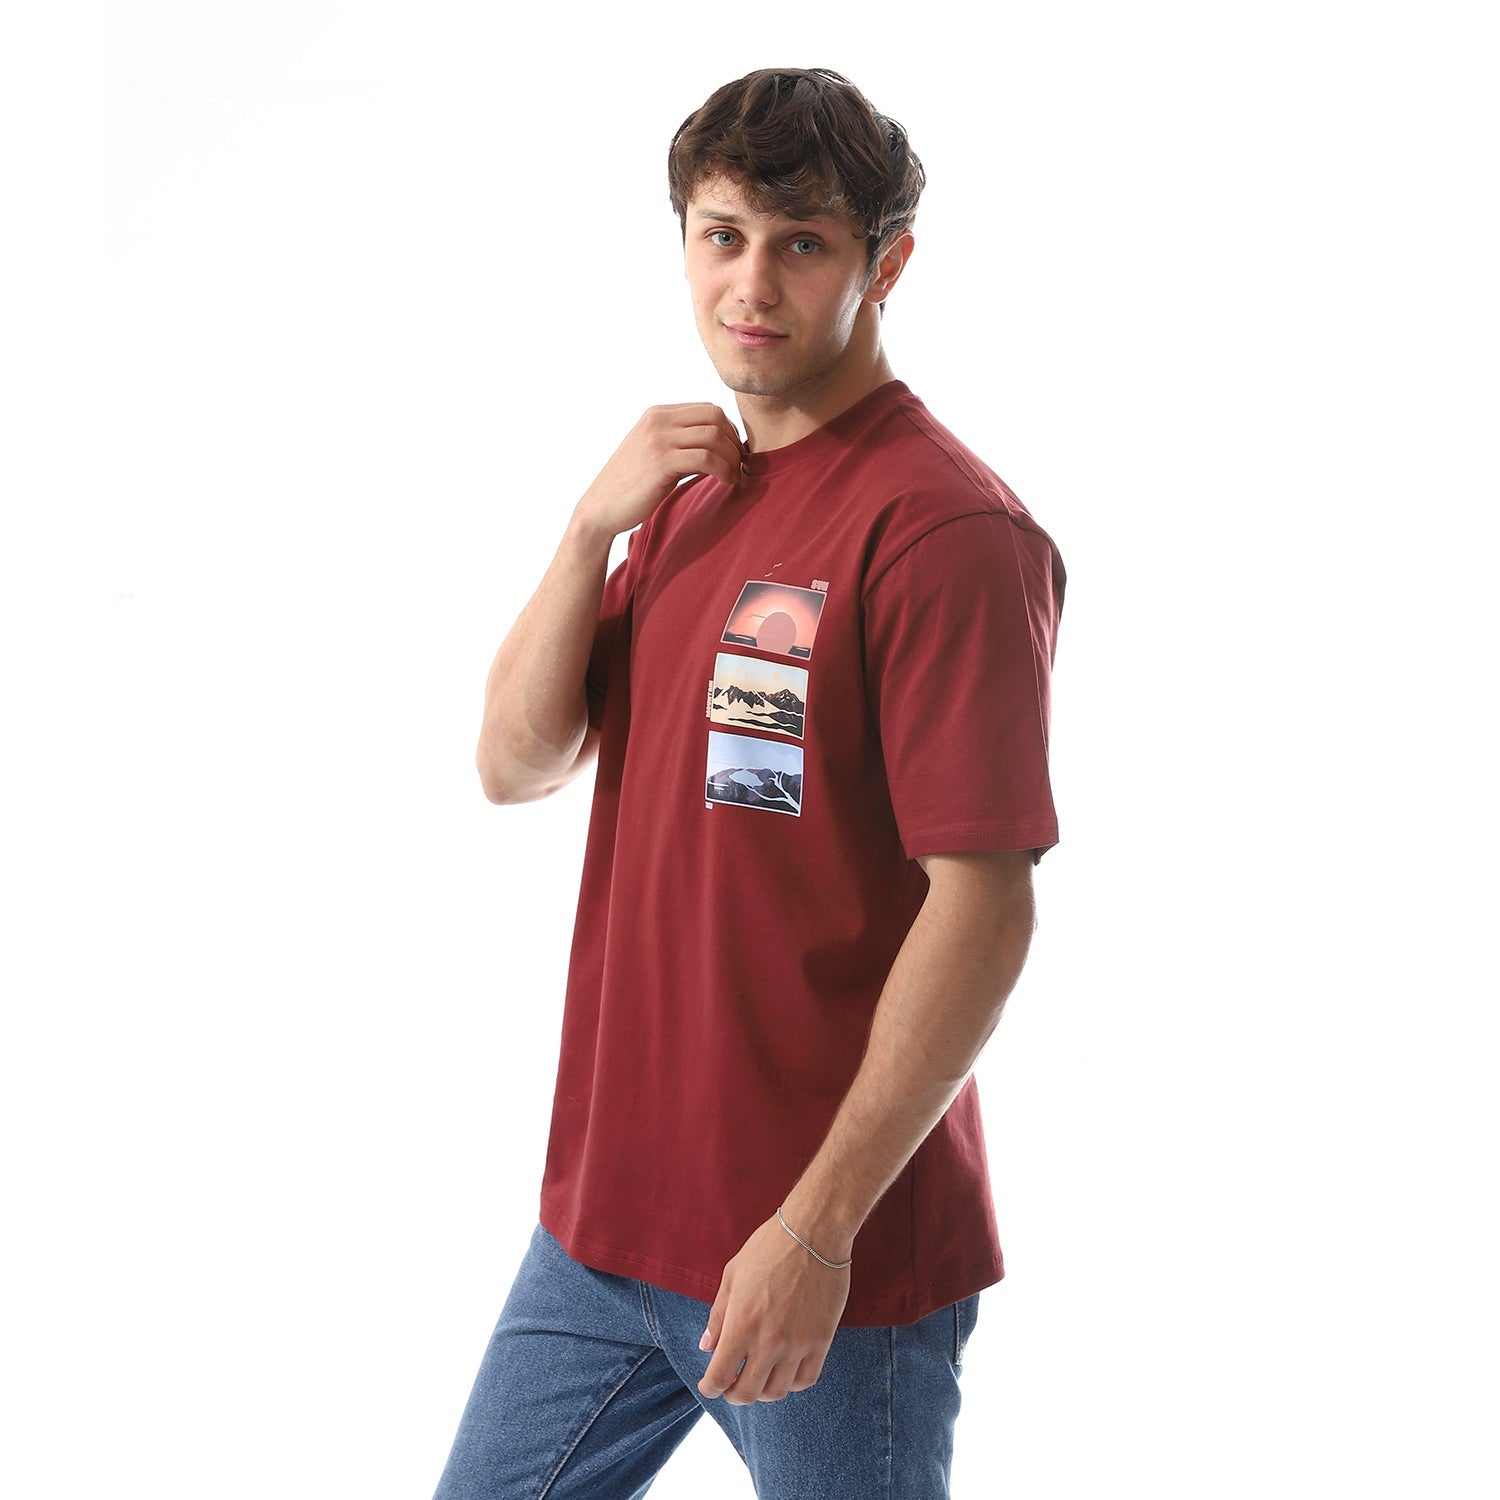 Men's Cotton T-Shirt - Classic and Comfortable Casual Tee-Dark red